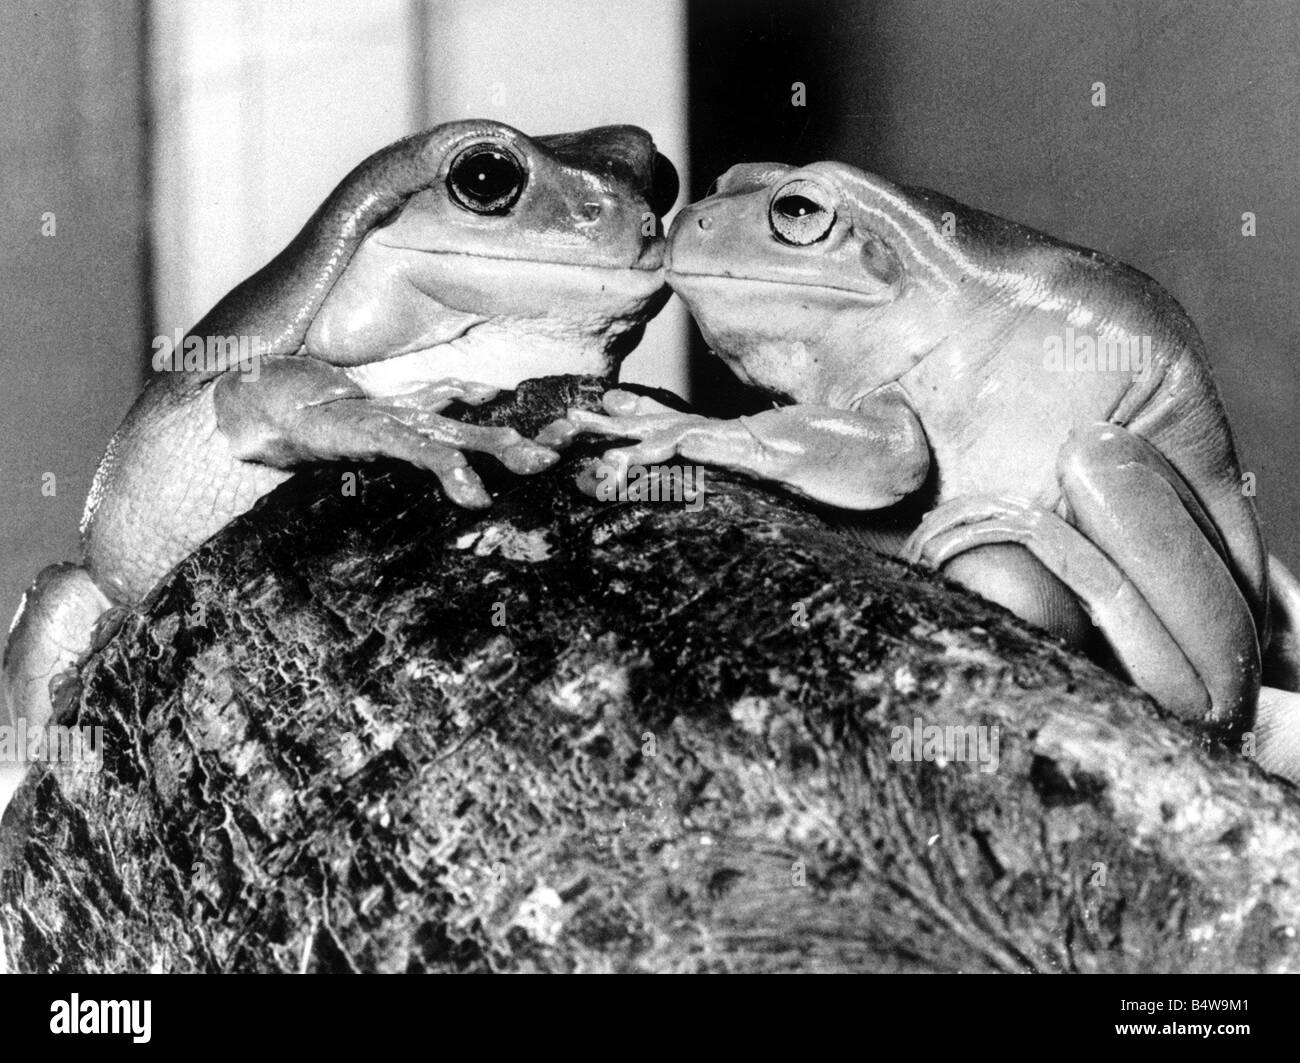 Kermit and Sheila tree frog lovers get close February 1987 Mirrorpix Stock Photo